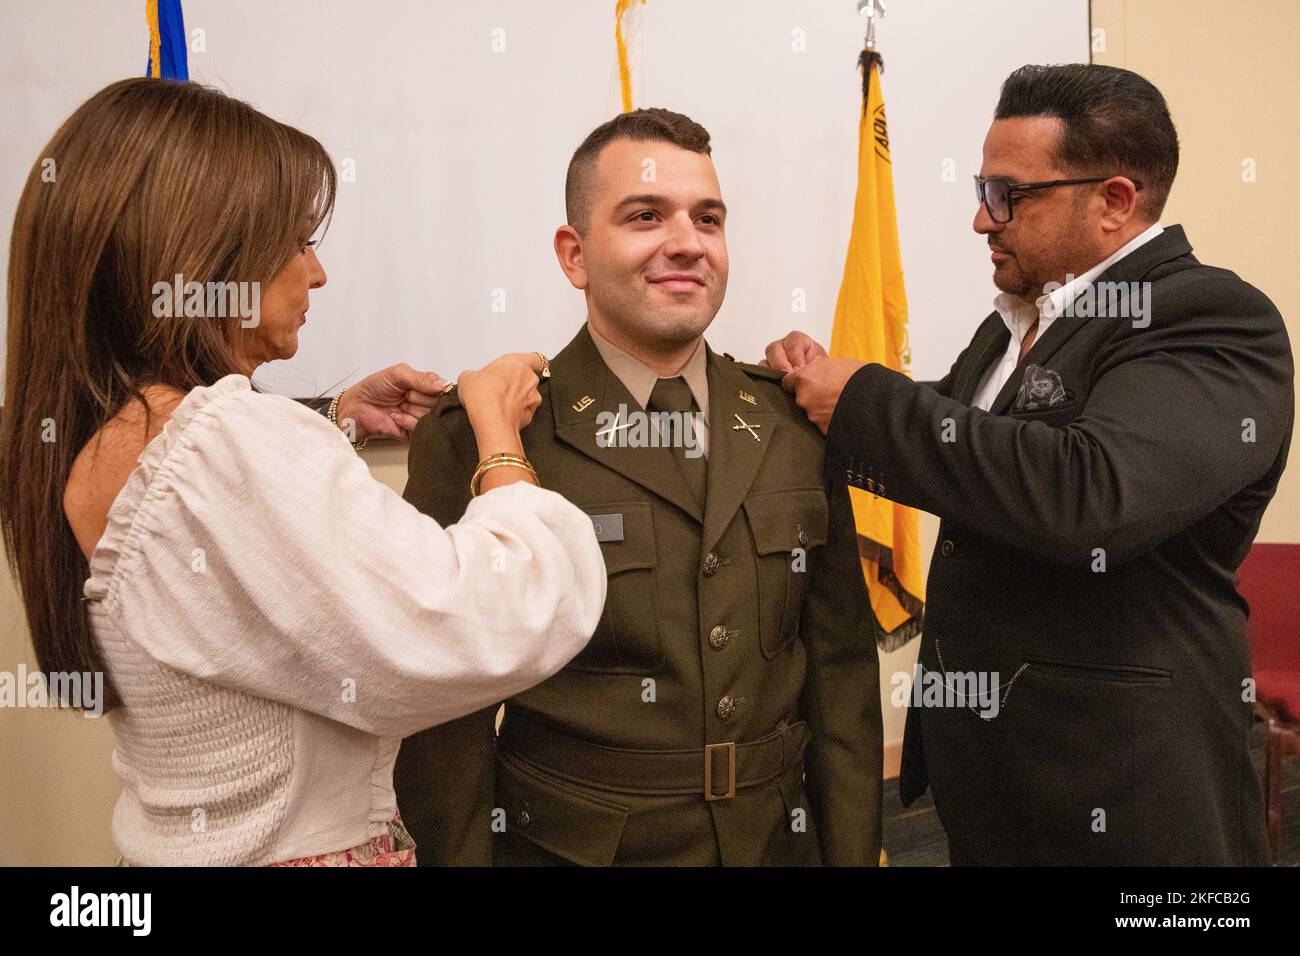 U.S. Army 2nd Lt. Michael Cotto stands at attention while his family, Israel Cotto and Elba Davila, pin on his second lieutenant rank insignia during a commissioning ceremony held inside the auditorium of the Regional Training Institute at Camp Nett, Niantic, Connecticut, Sept. 6, 2022. Cotto will be a field artillery officer. Stock Photo